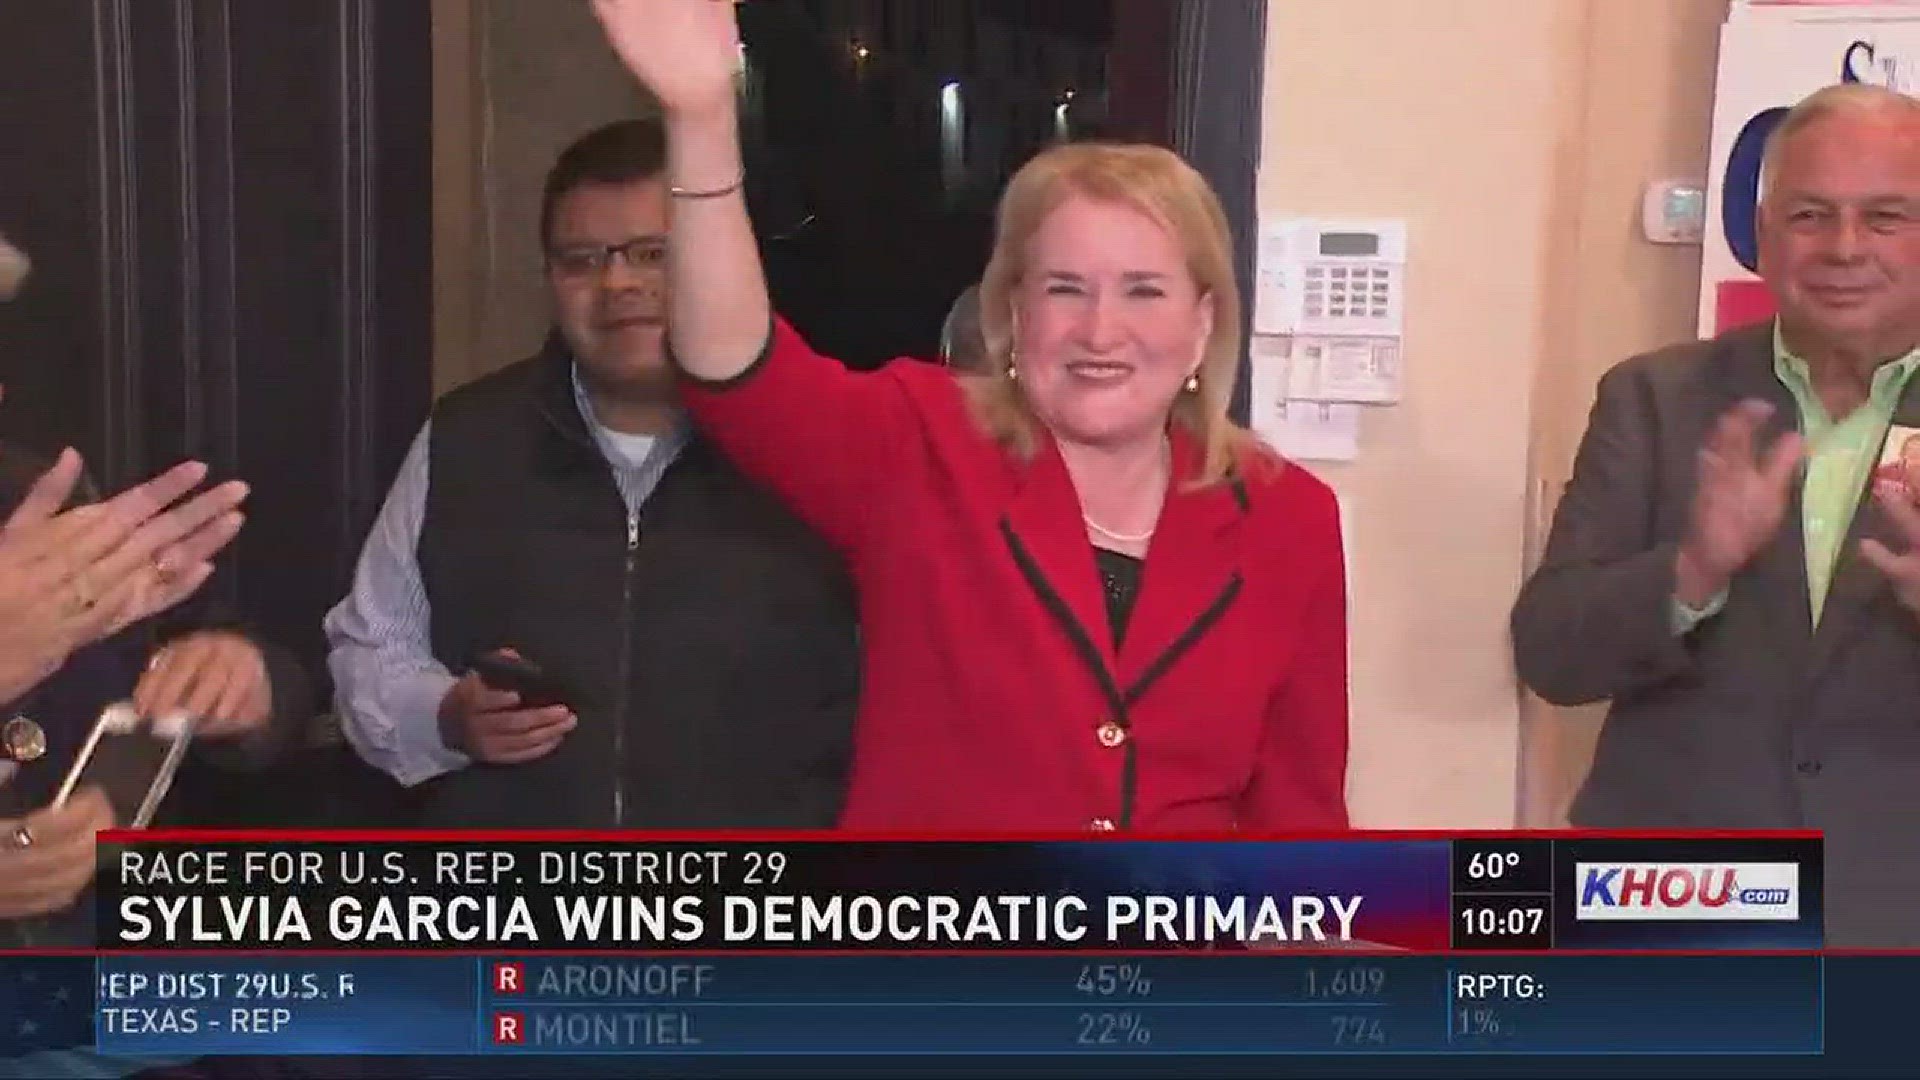 Sylvia Garcia won the Democratic Primary in the race for the US Representative seat in District 29 Tuesday night.